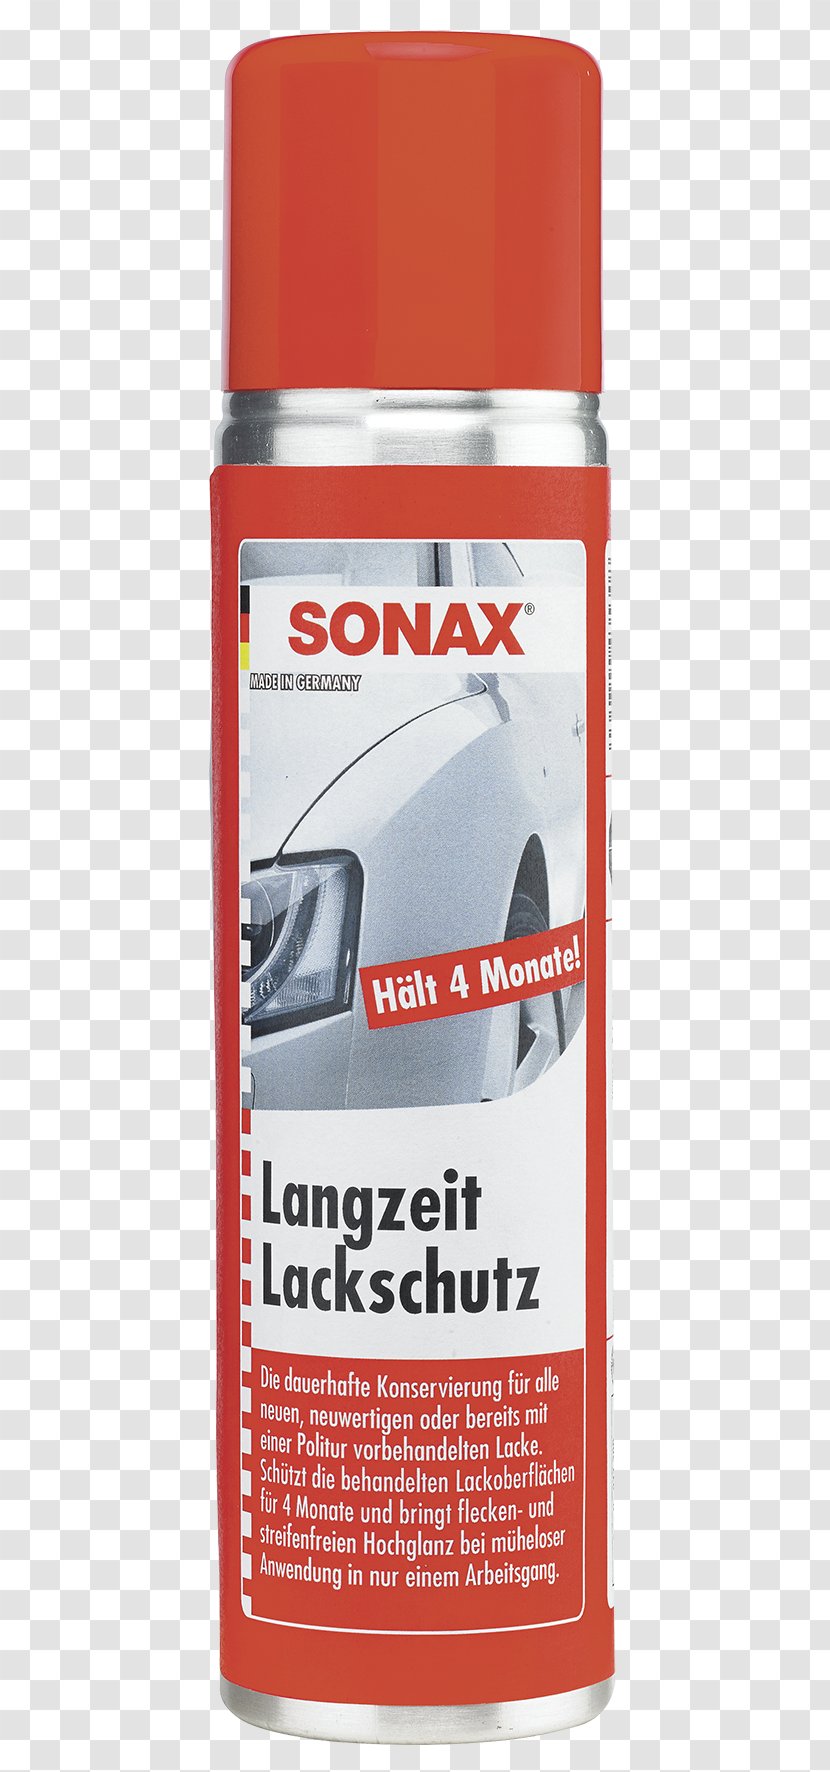 Sonax Long-Term CoatingProtection 400 Millilitres Spray Can Motor Oil Lubricant Aerosol Product - Solvent - Paint Protection Transparent PNG